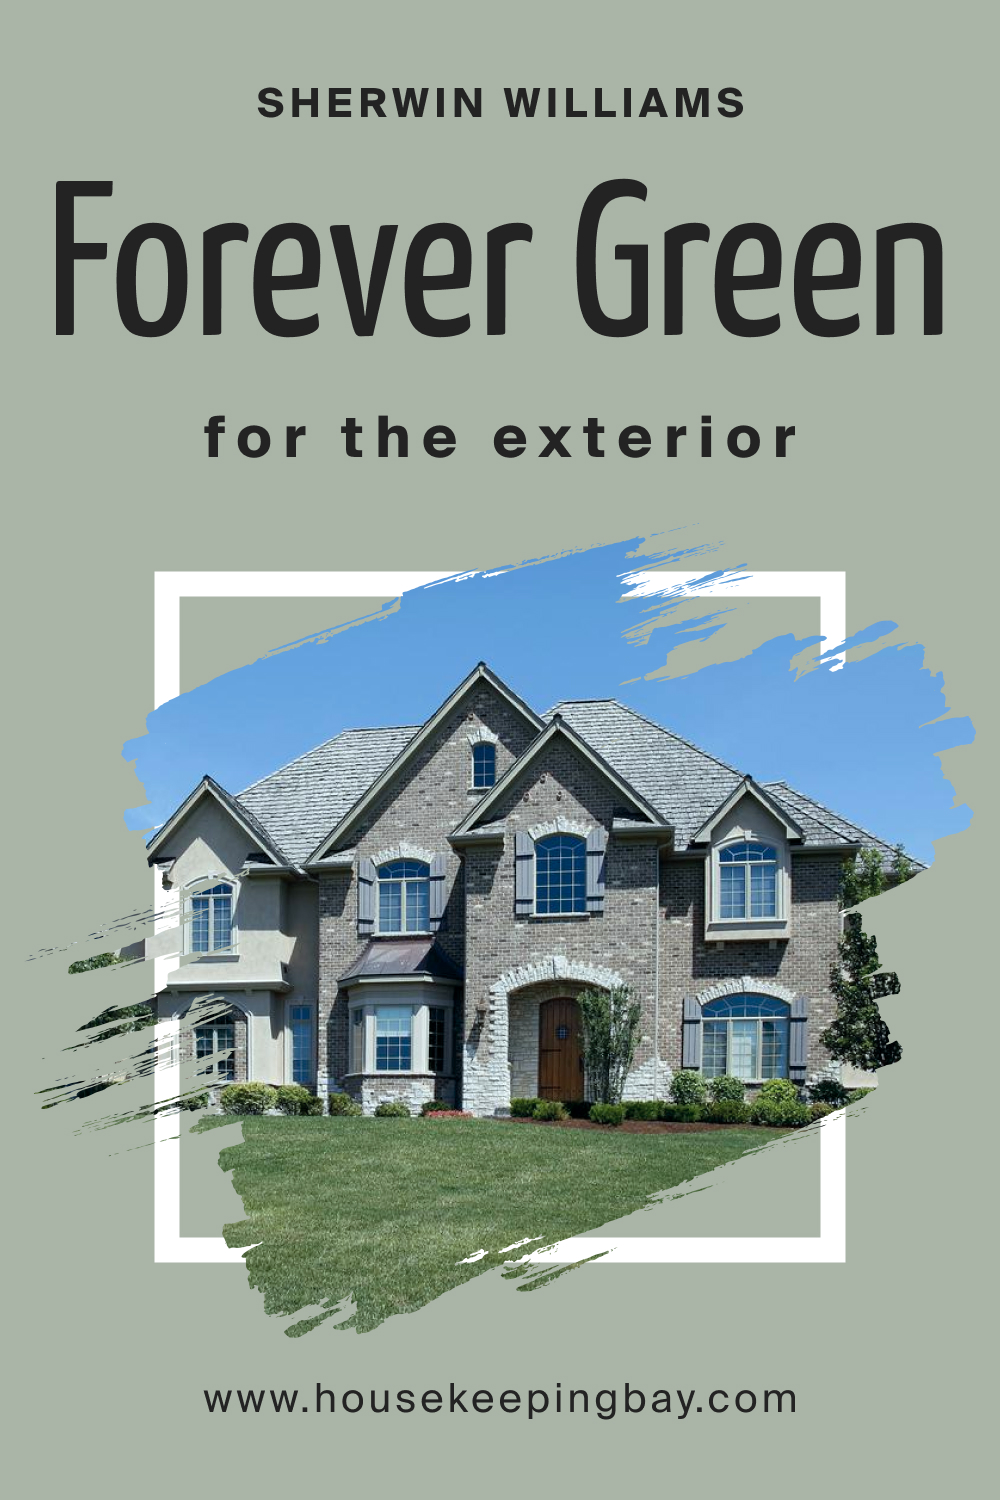 Sherwin Williams. SW 9653 Forever Green For the exterior